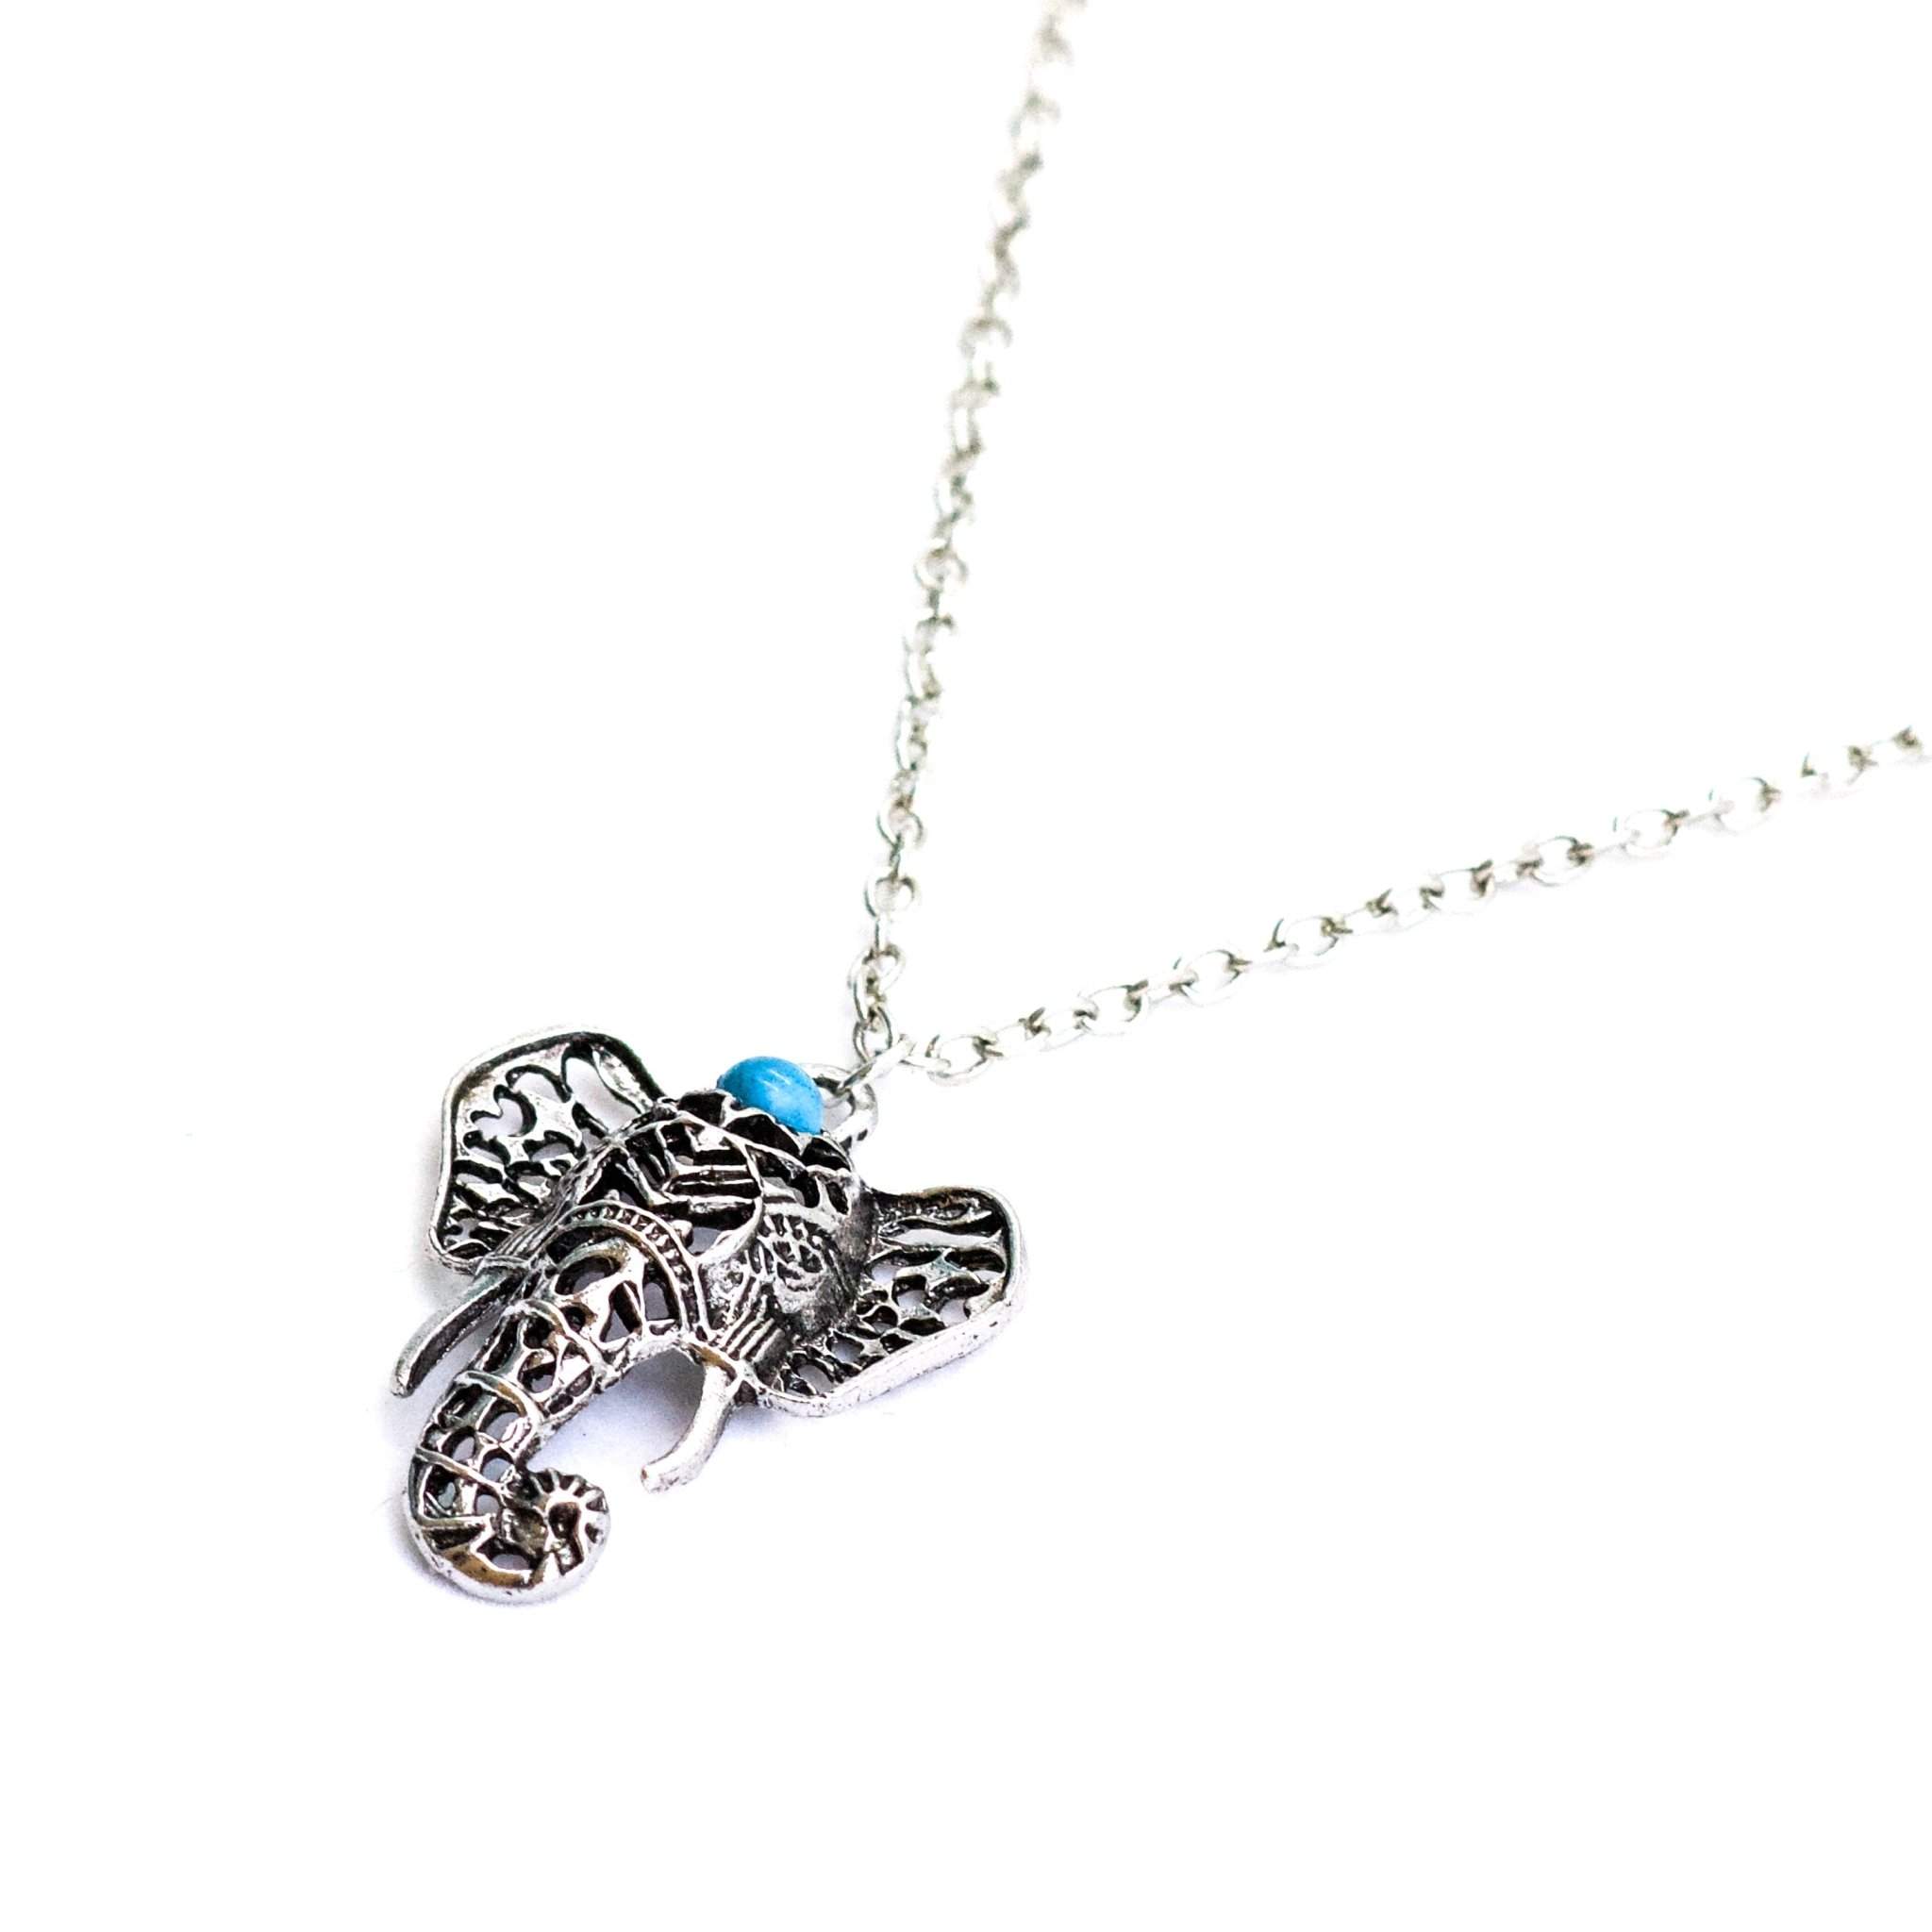 BALI ELEPHANT NECKLACE Elepanta Necklaces - Buy Today Elephant Pants Jewelry And Bohemian Clothes Handmade In Thailand Help To Save The Elephants FairTrade And Vegan